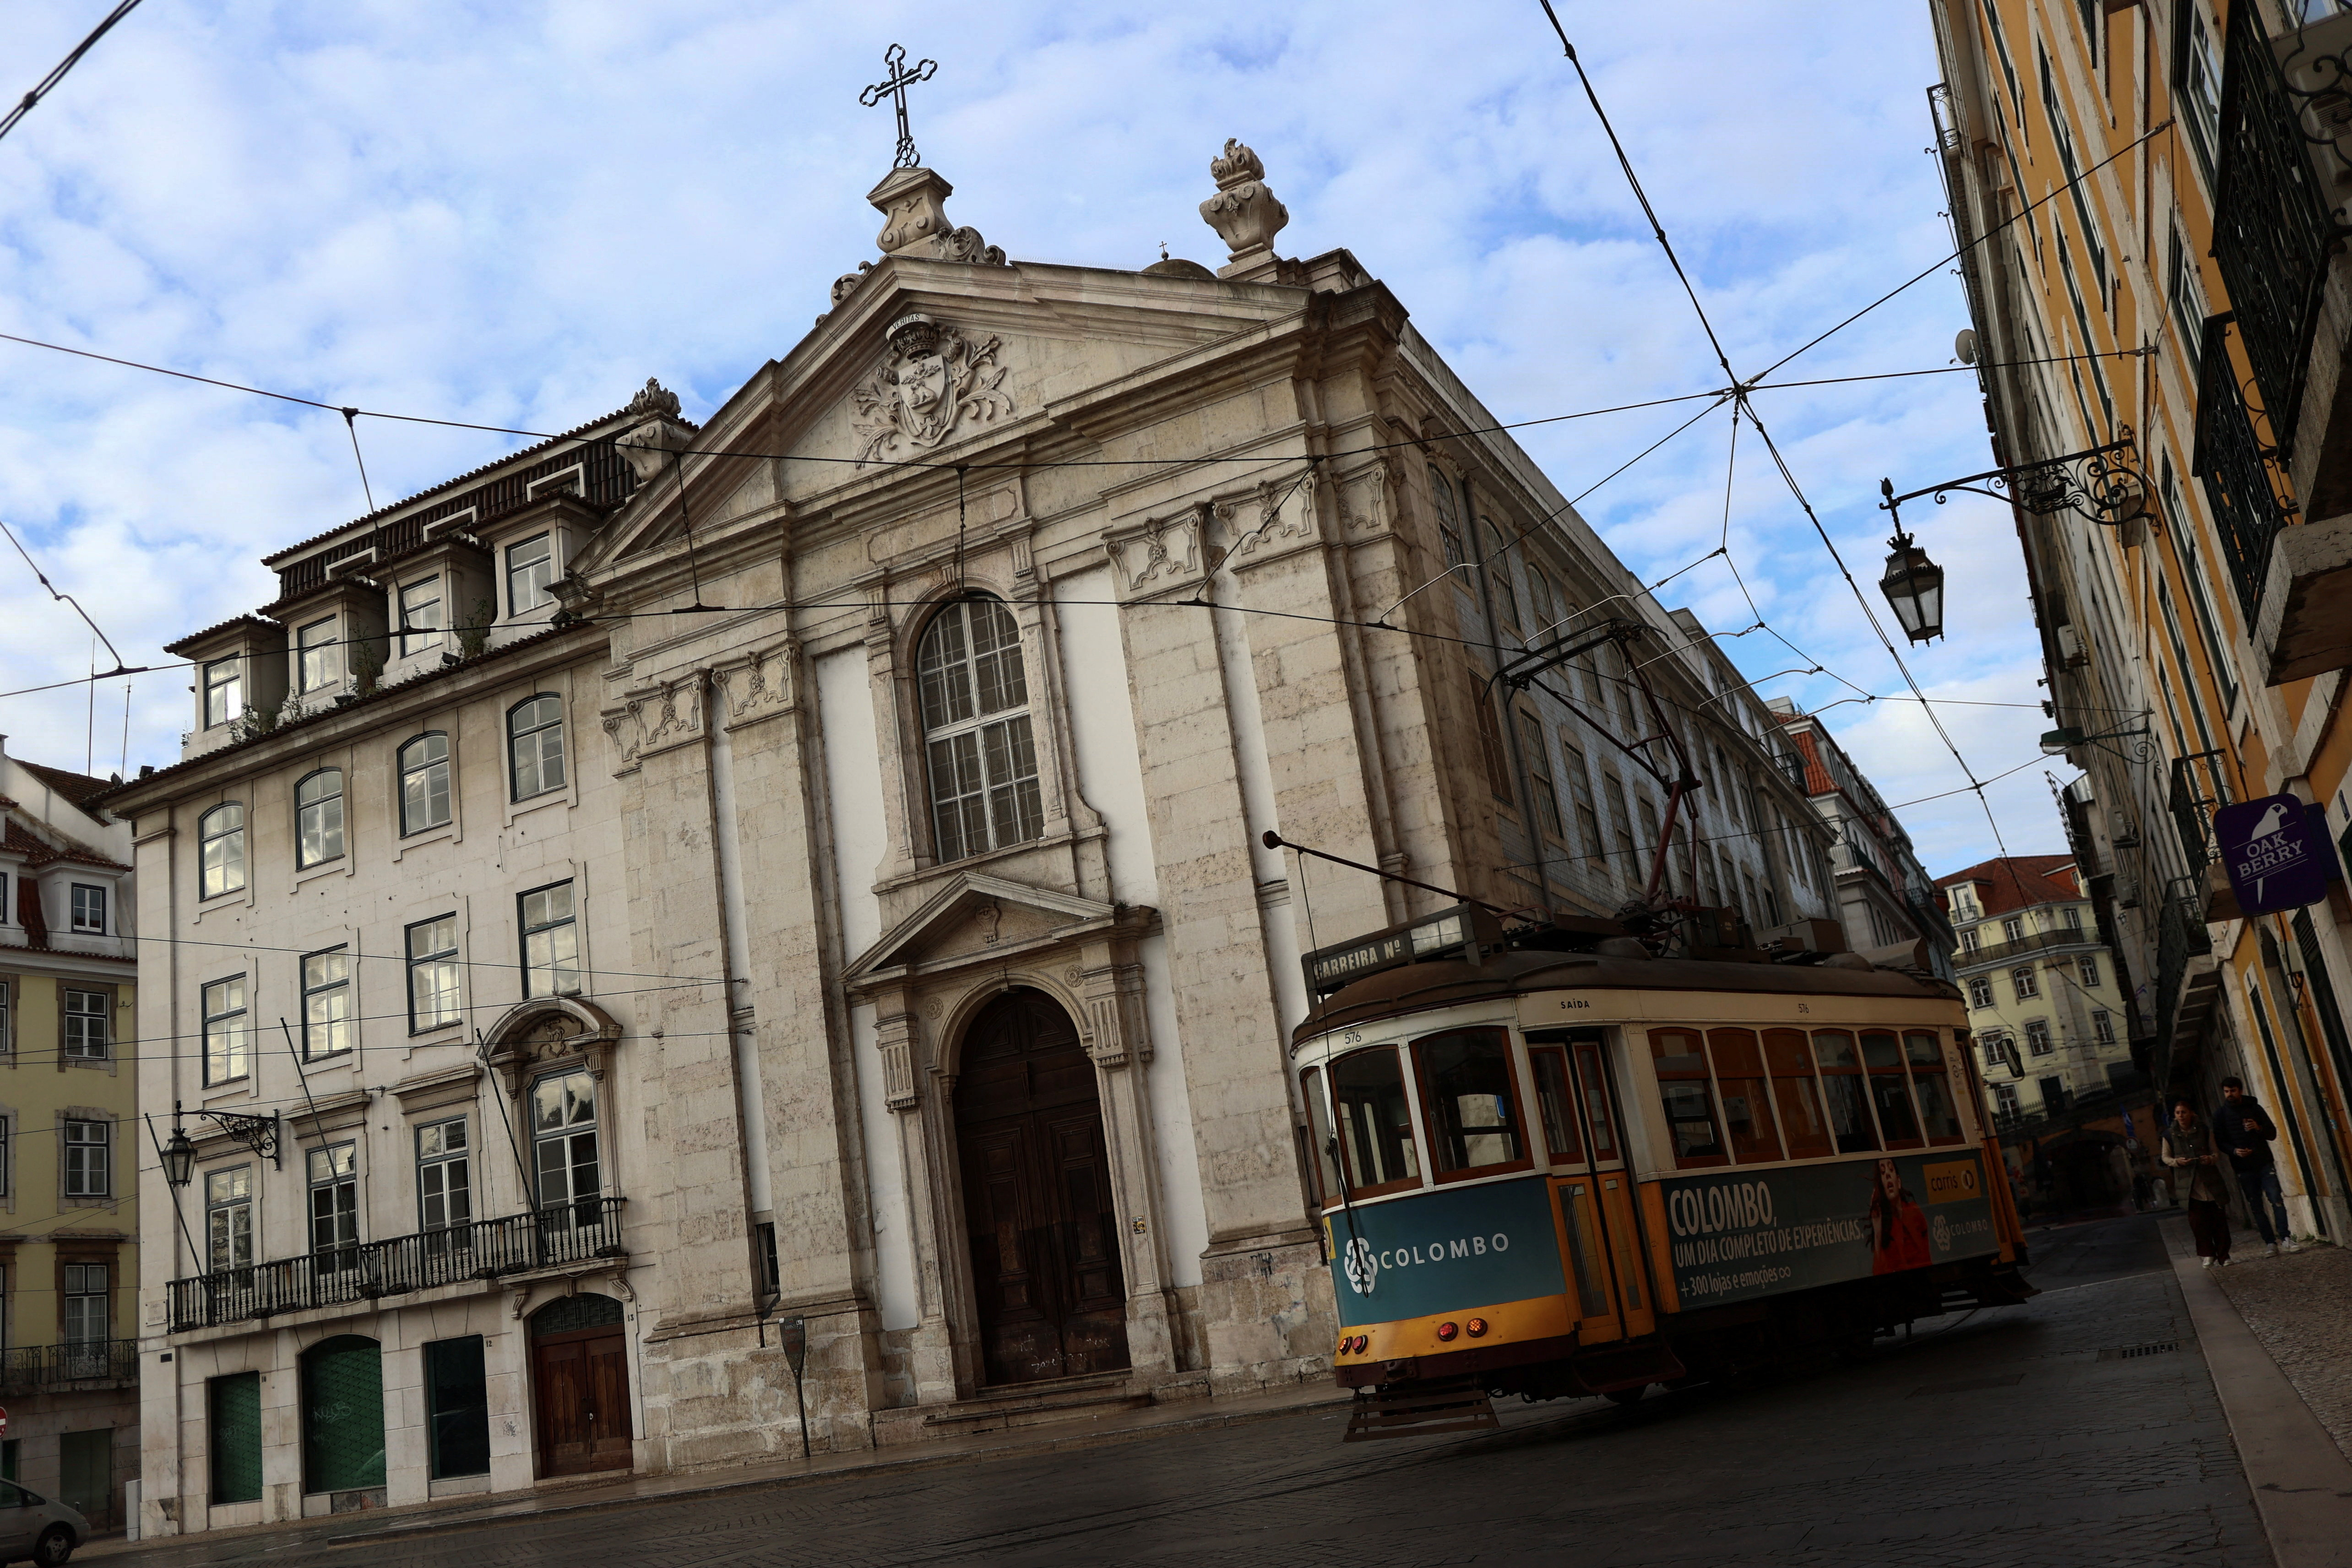 A church is seen on the day Portugal's commission investigating allegations of historical child sexual abuse by members of the Portuguese Catholic church will unveil its report, in Lisbon